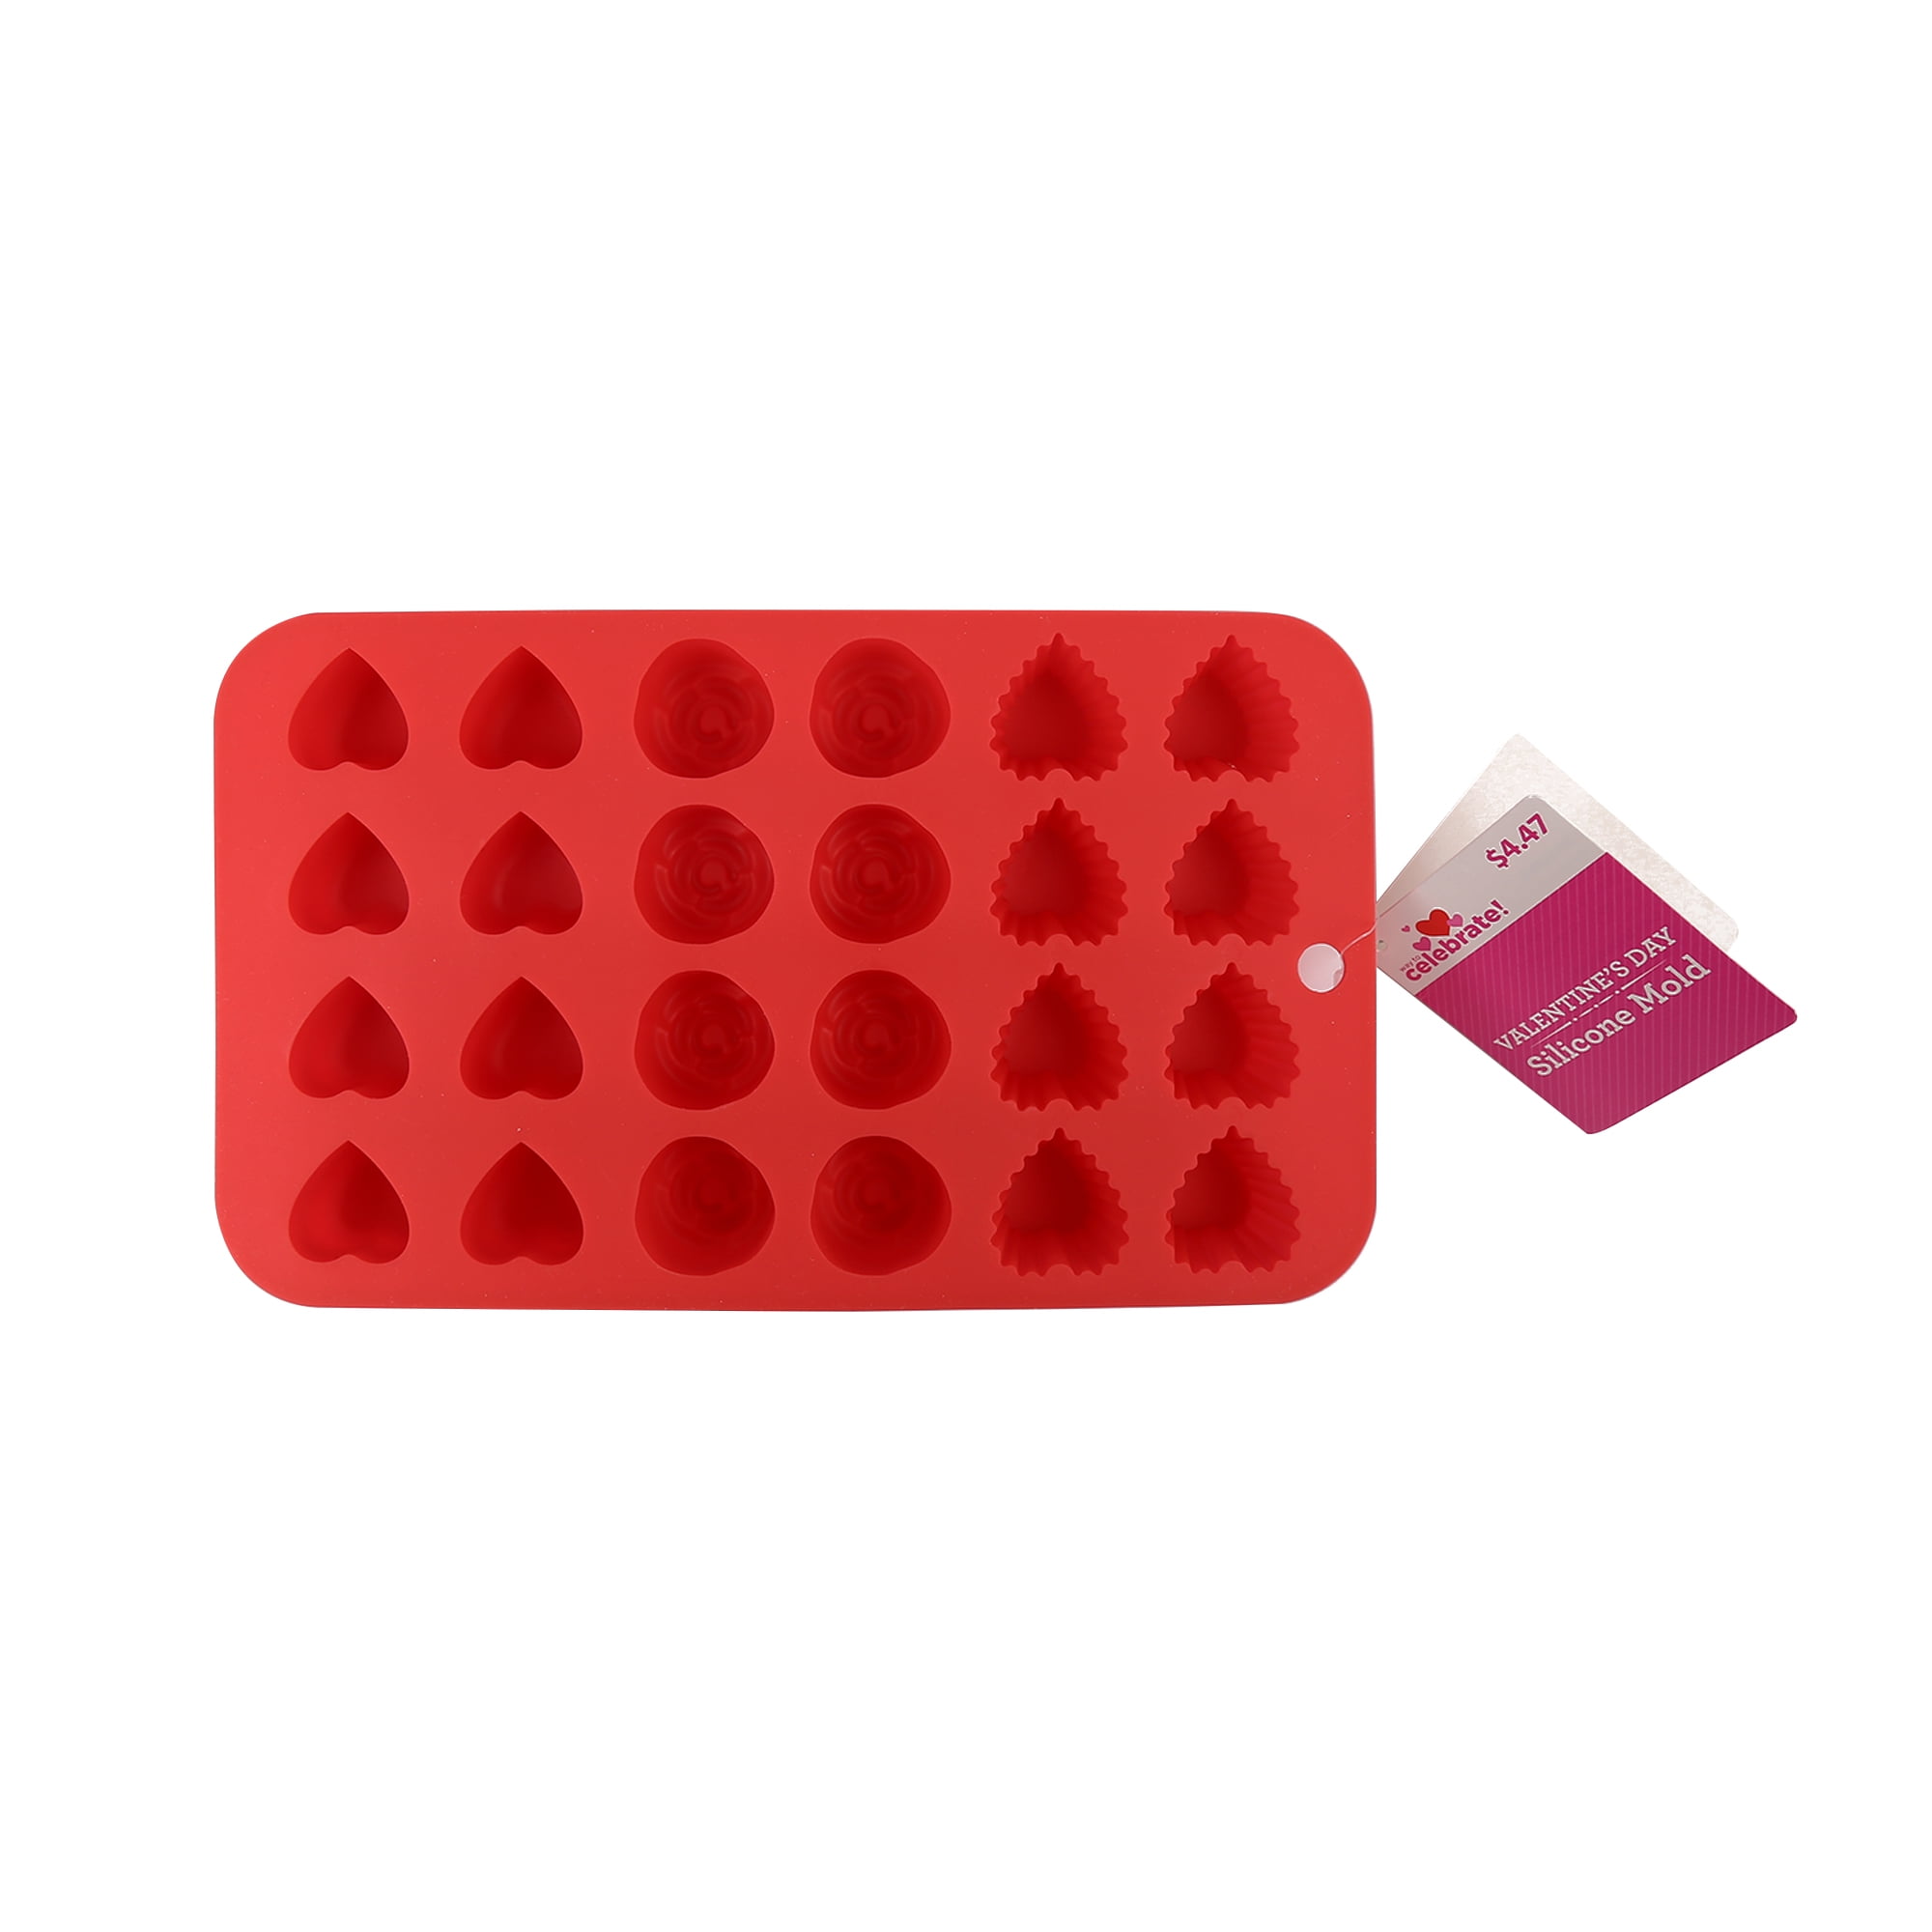 WAY TO CELEBRATE! Way To Celebrate Valentine's Day Heart and Rose Silicone Mold Red Color